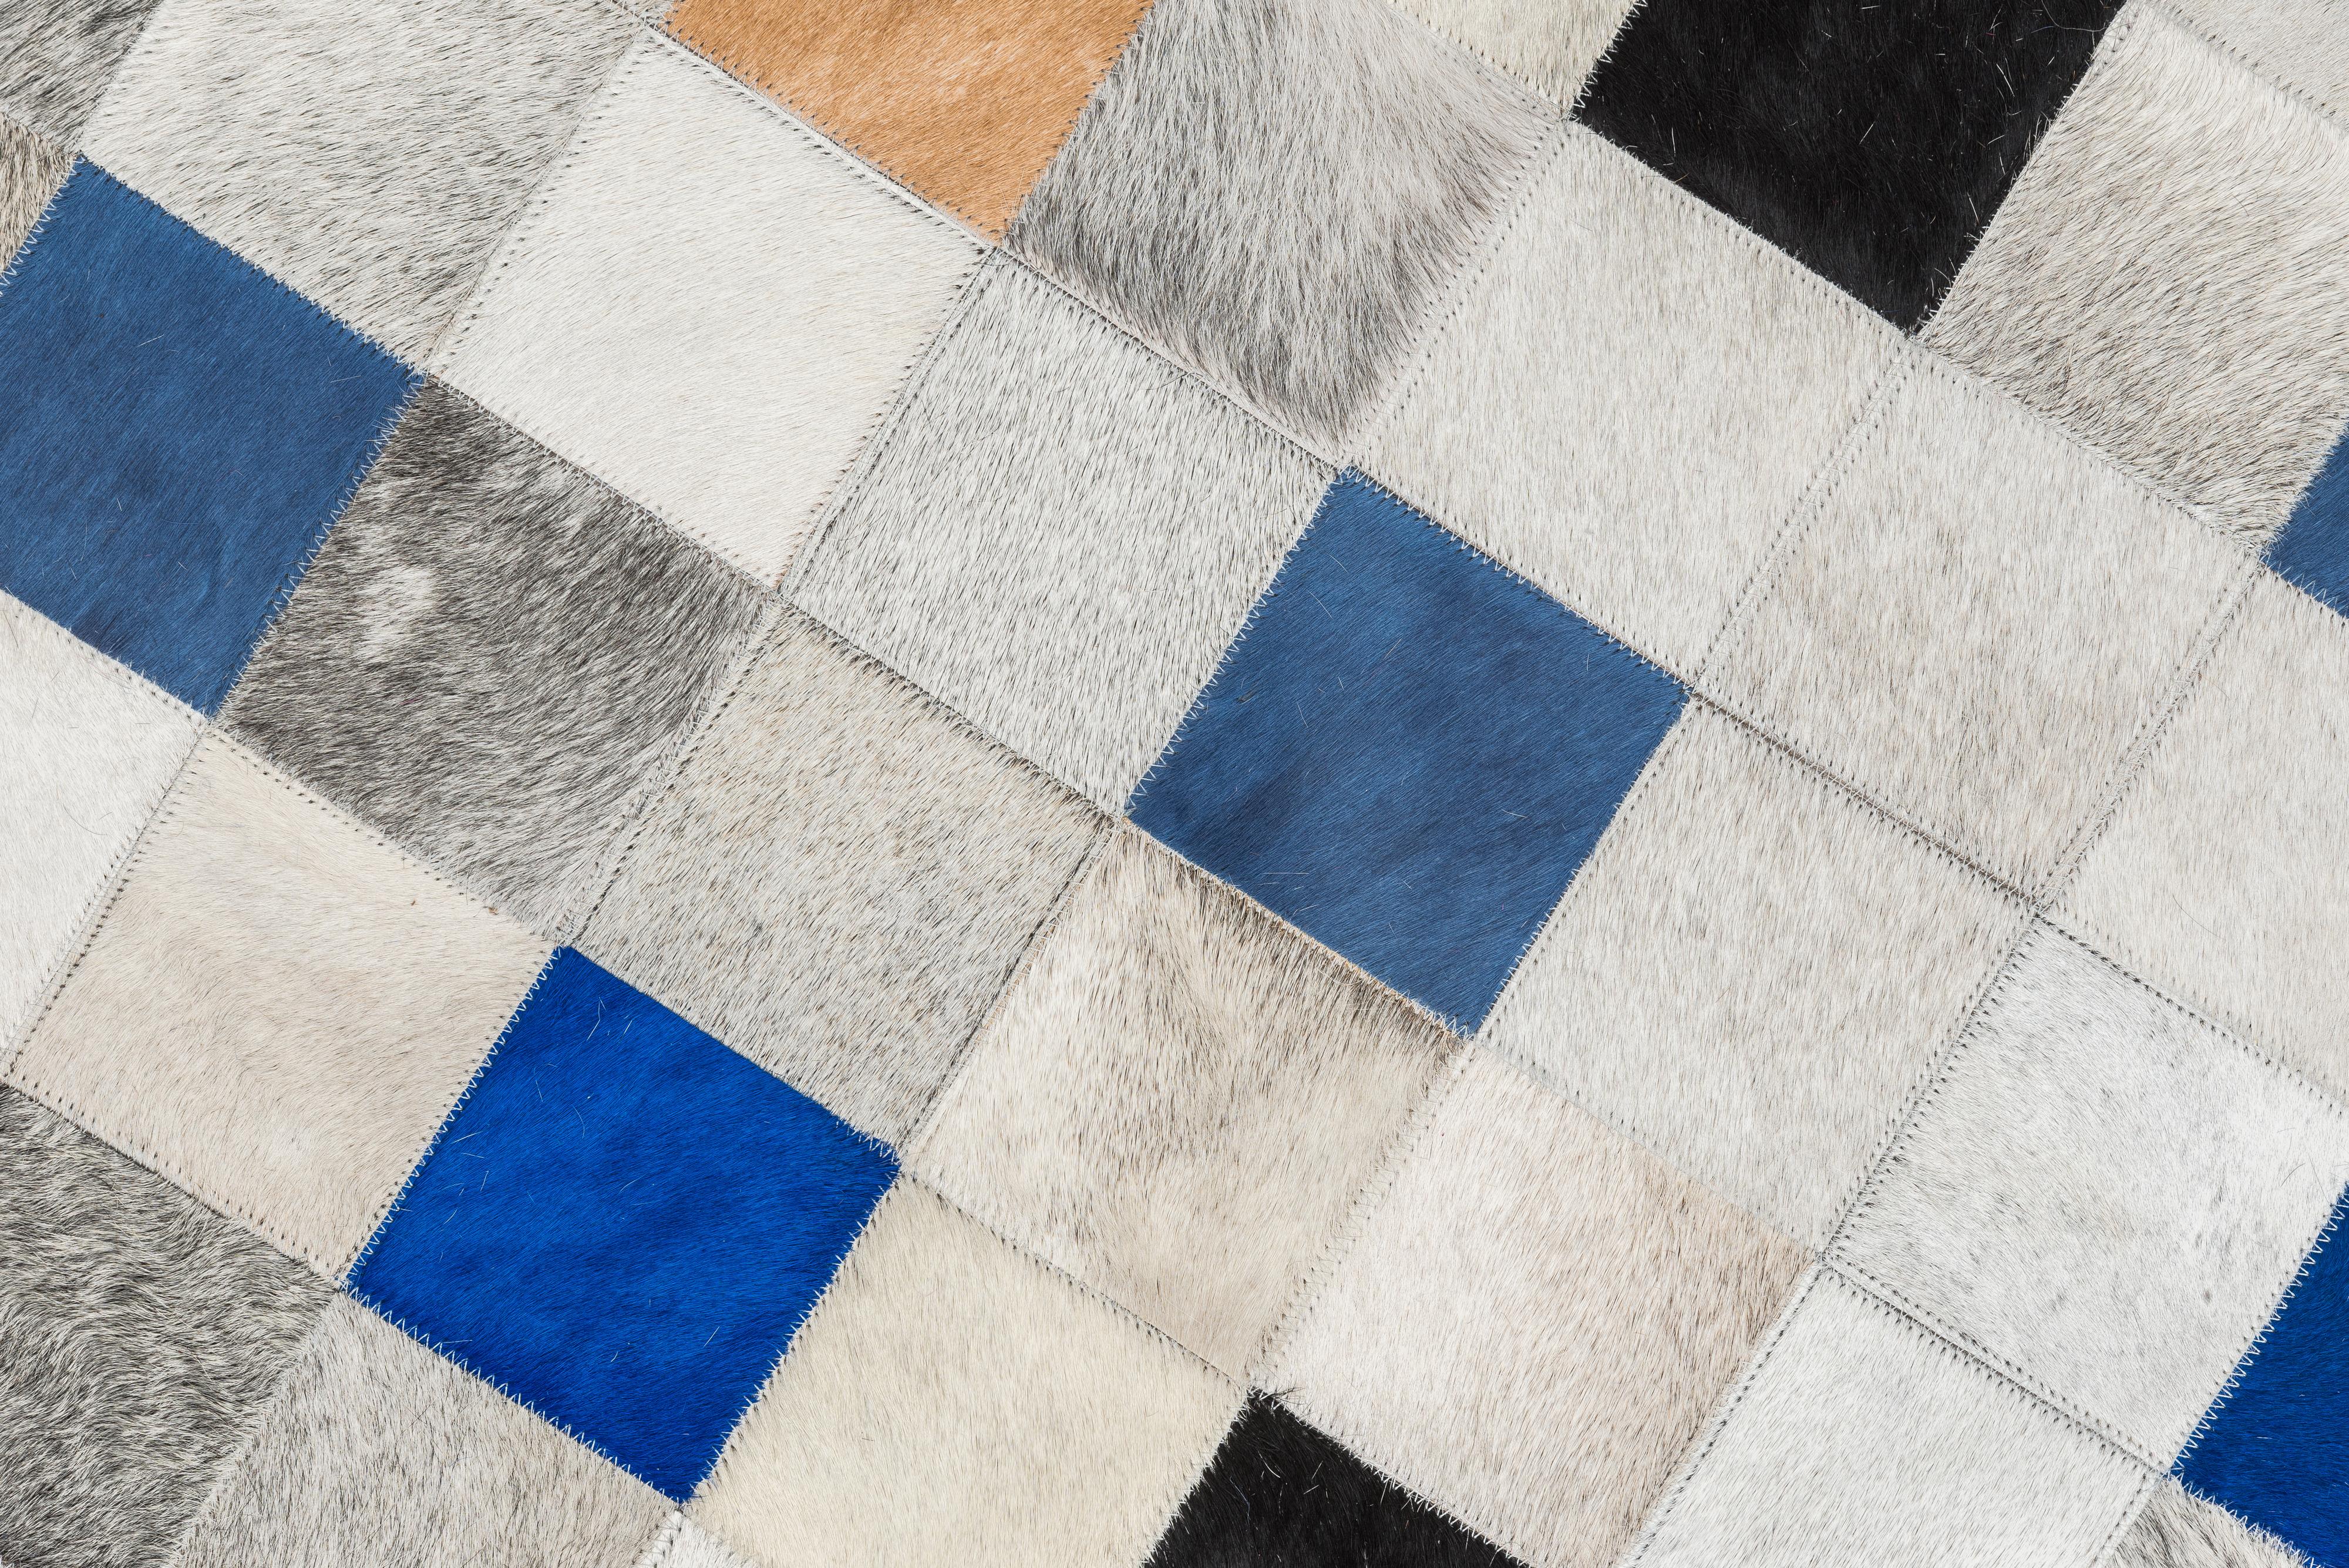 A playful, yet striking new release under our Alta line, the falling squares rug will add spades of charisma and sophistication to your interior. The blue colorway is combined with natural grey shades to create a warm and rich texture on your